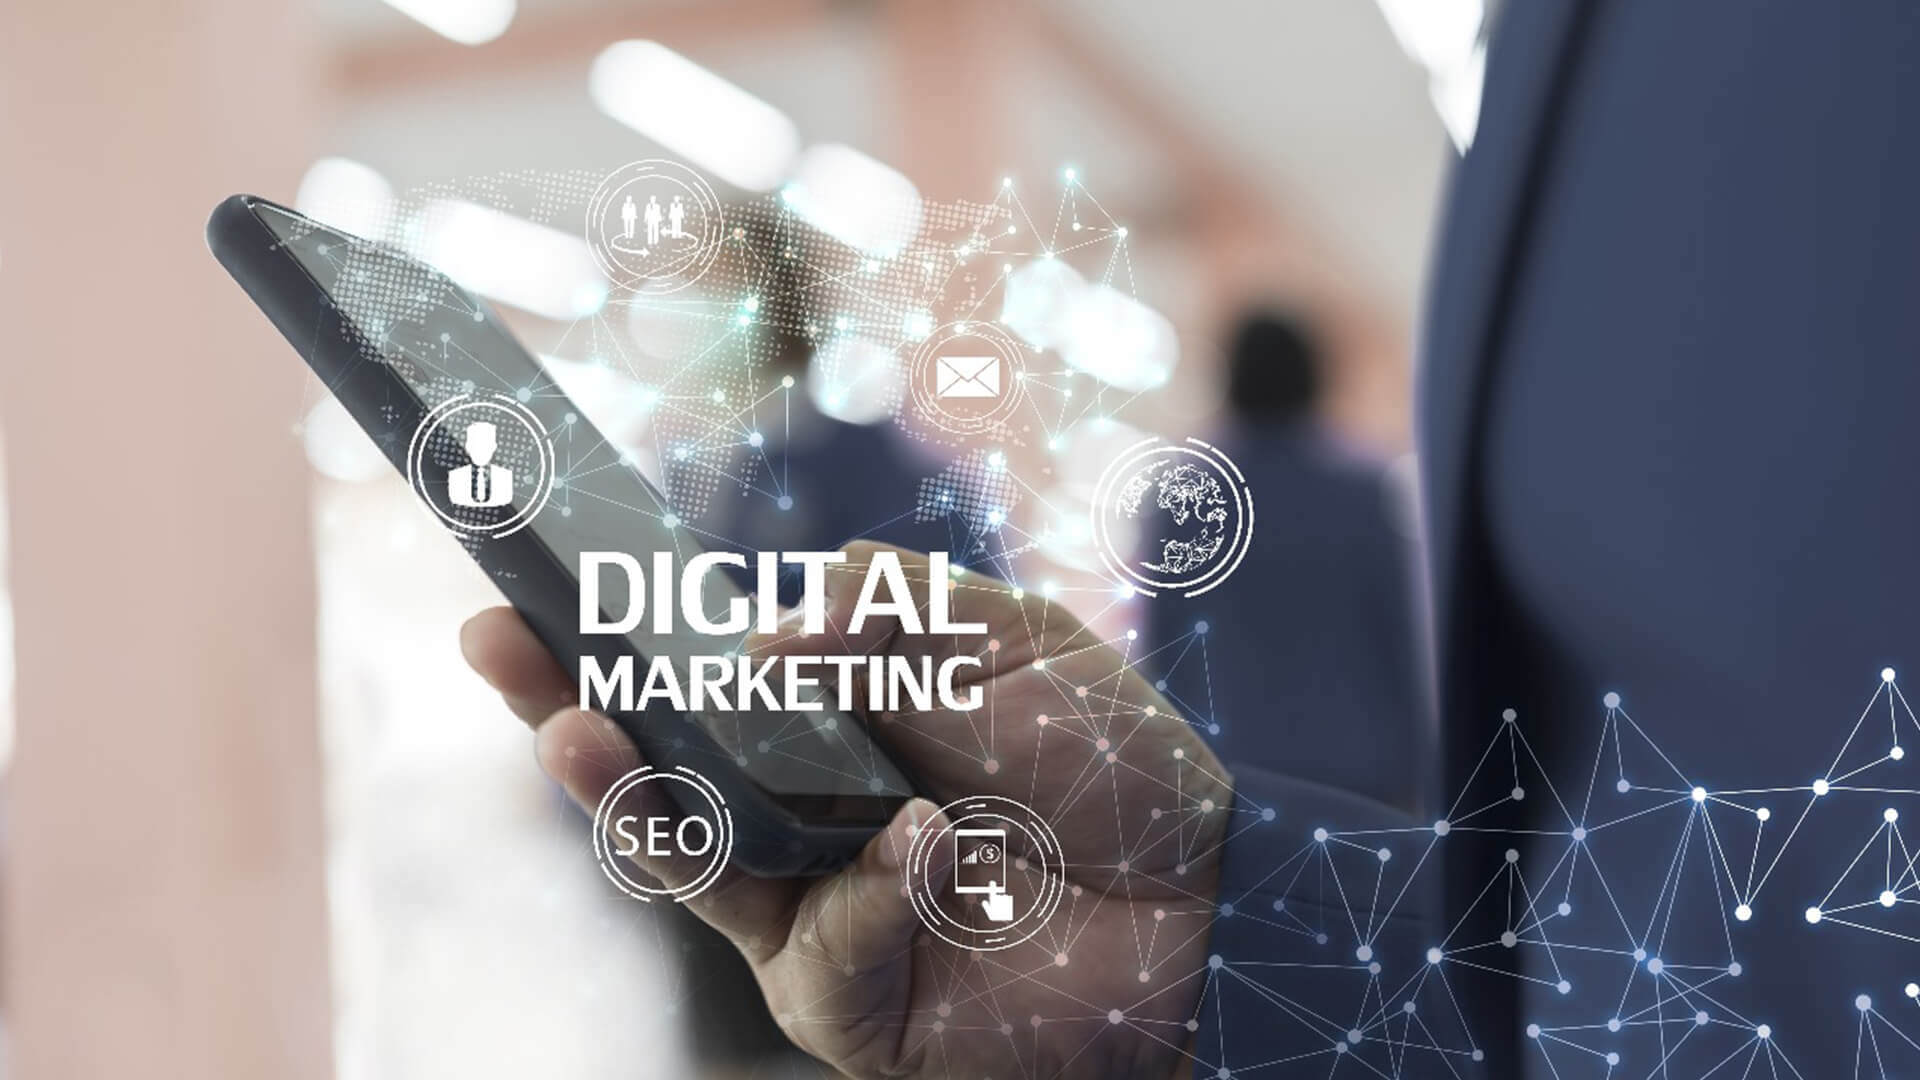 E-Marketing vs. Digital Marketing: What's the Difference?